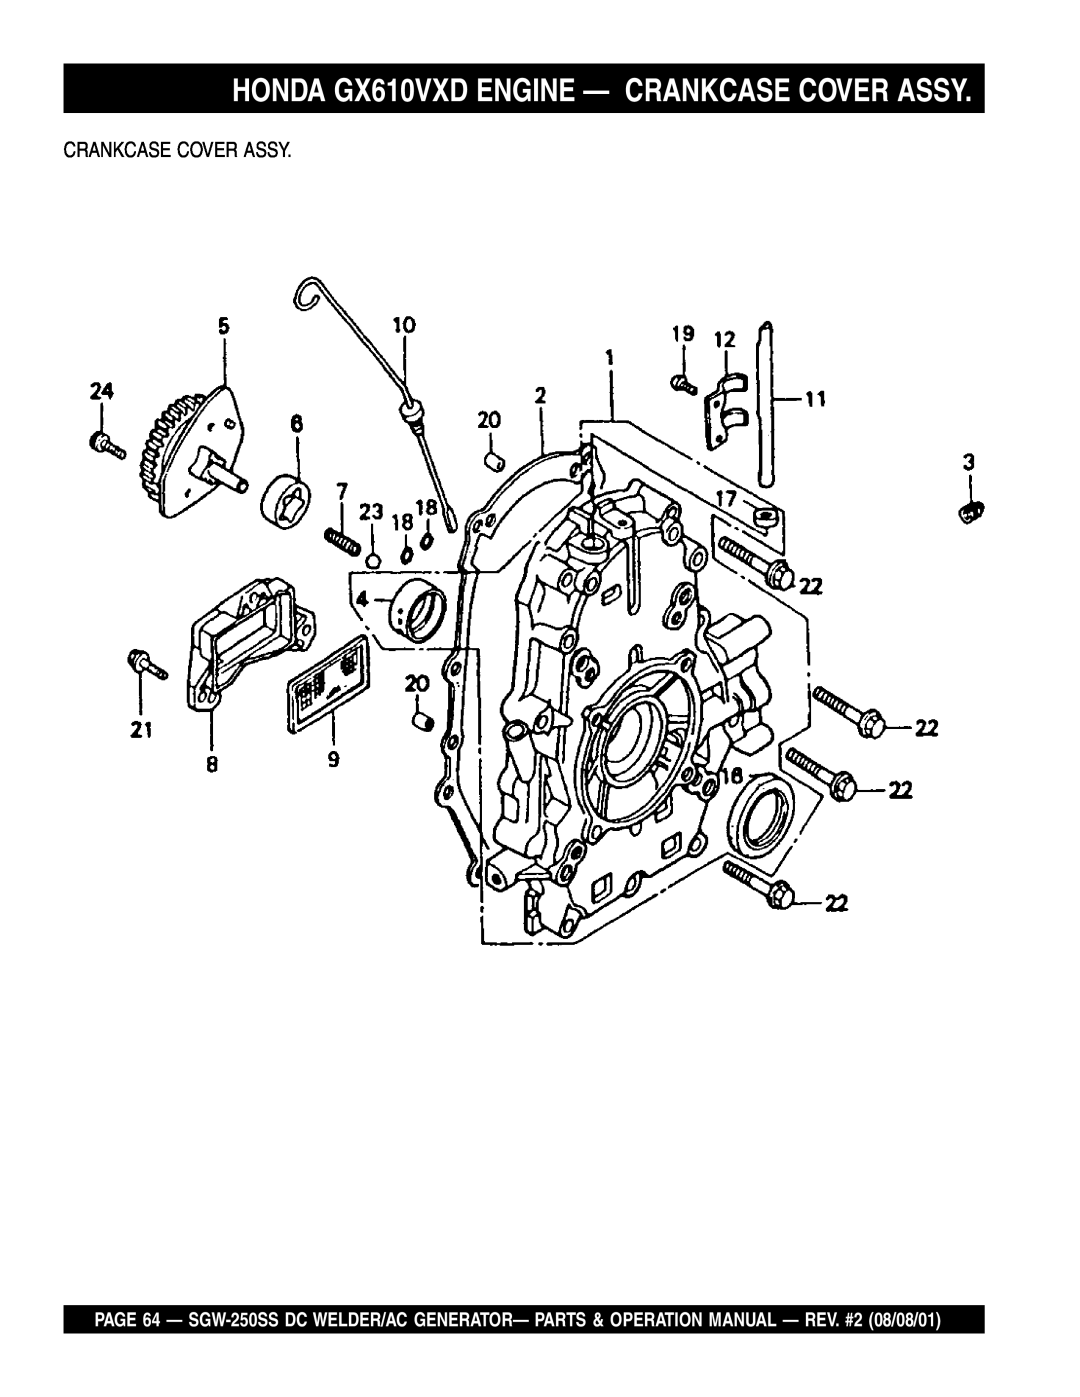 Multiquip SGW-250SS operation manual HONDA GX610VXD ENGINE - CRANKCASE COVER ASSY, Crankcase Cover Assy 